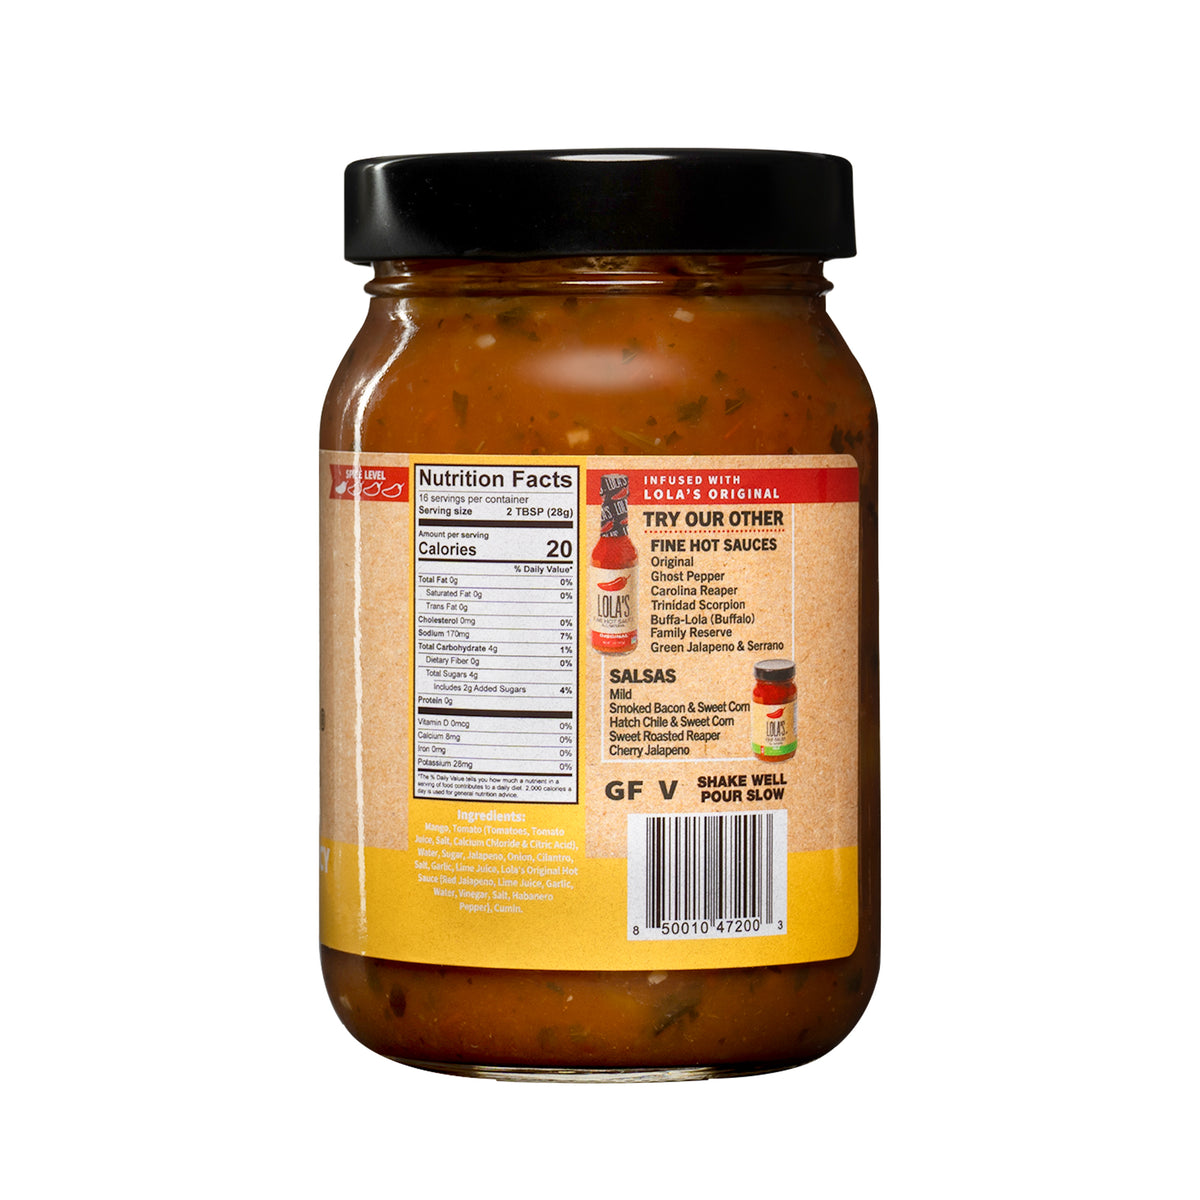 A jar of Lola's Sweet & Spicy Mango Salsa, a delicious fusion of ripe mangos and fresh ingredients for a tropical flavor.